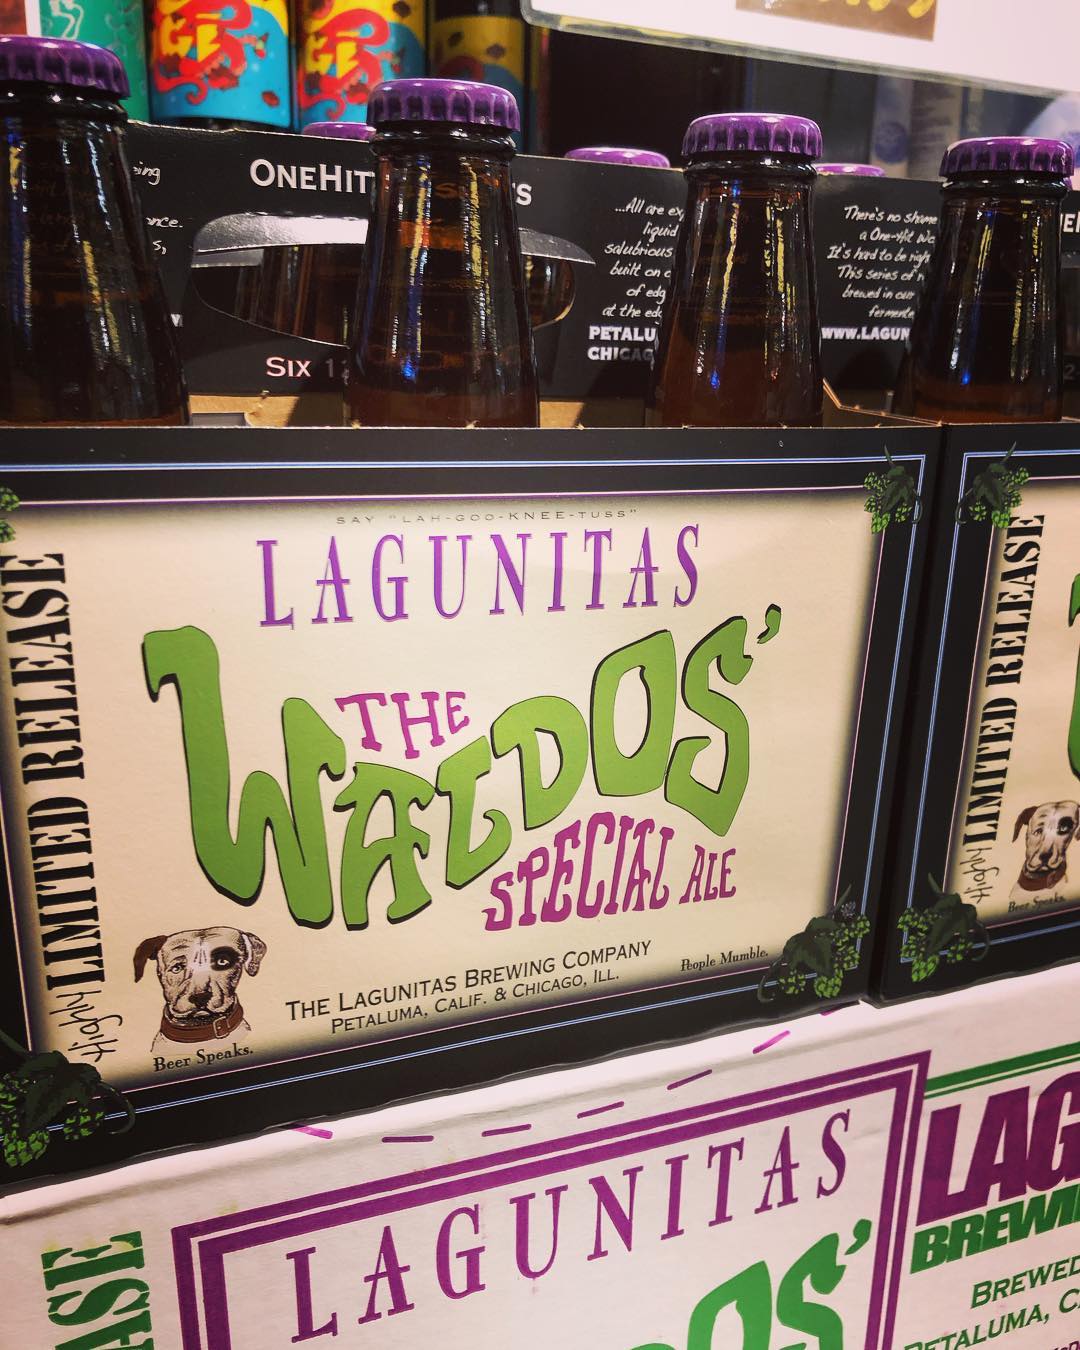 @lagunitasbeer Waldos’ Special Ale is now available at our Perkins Rd location! #beer #onehitter #whereswaldo